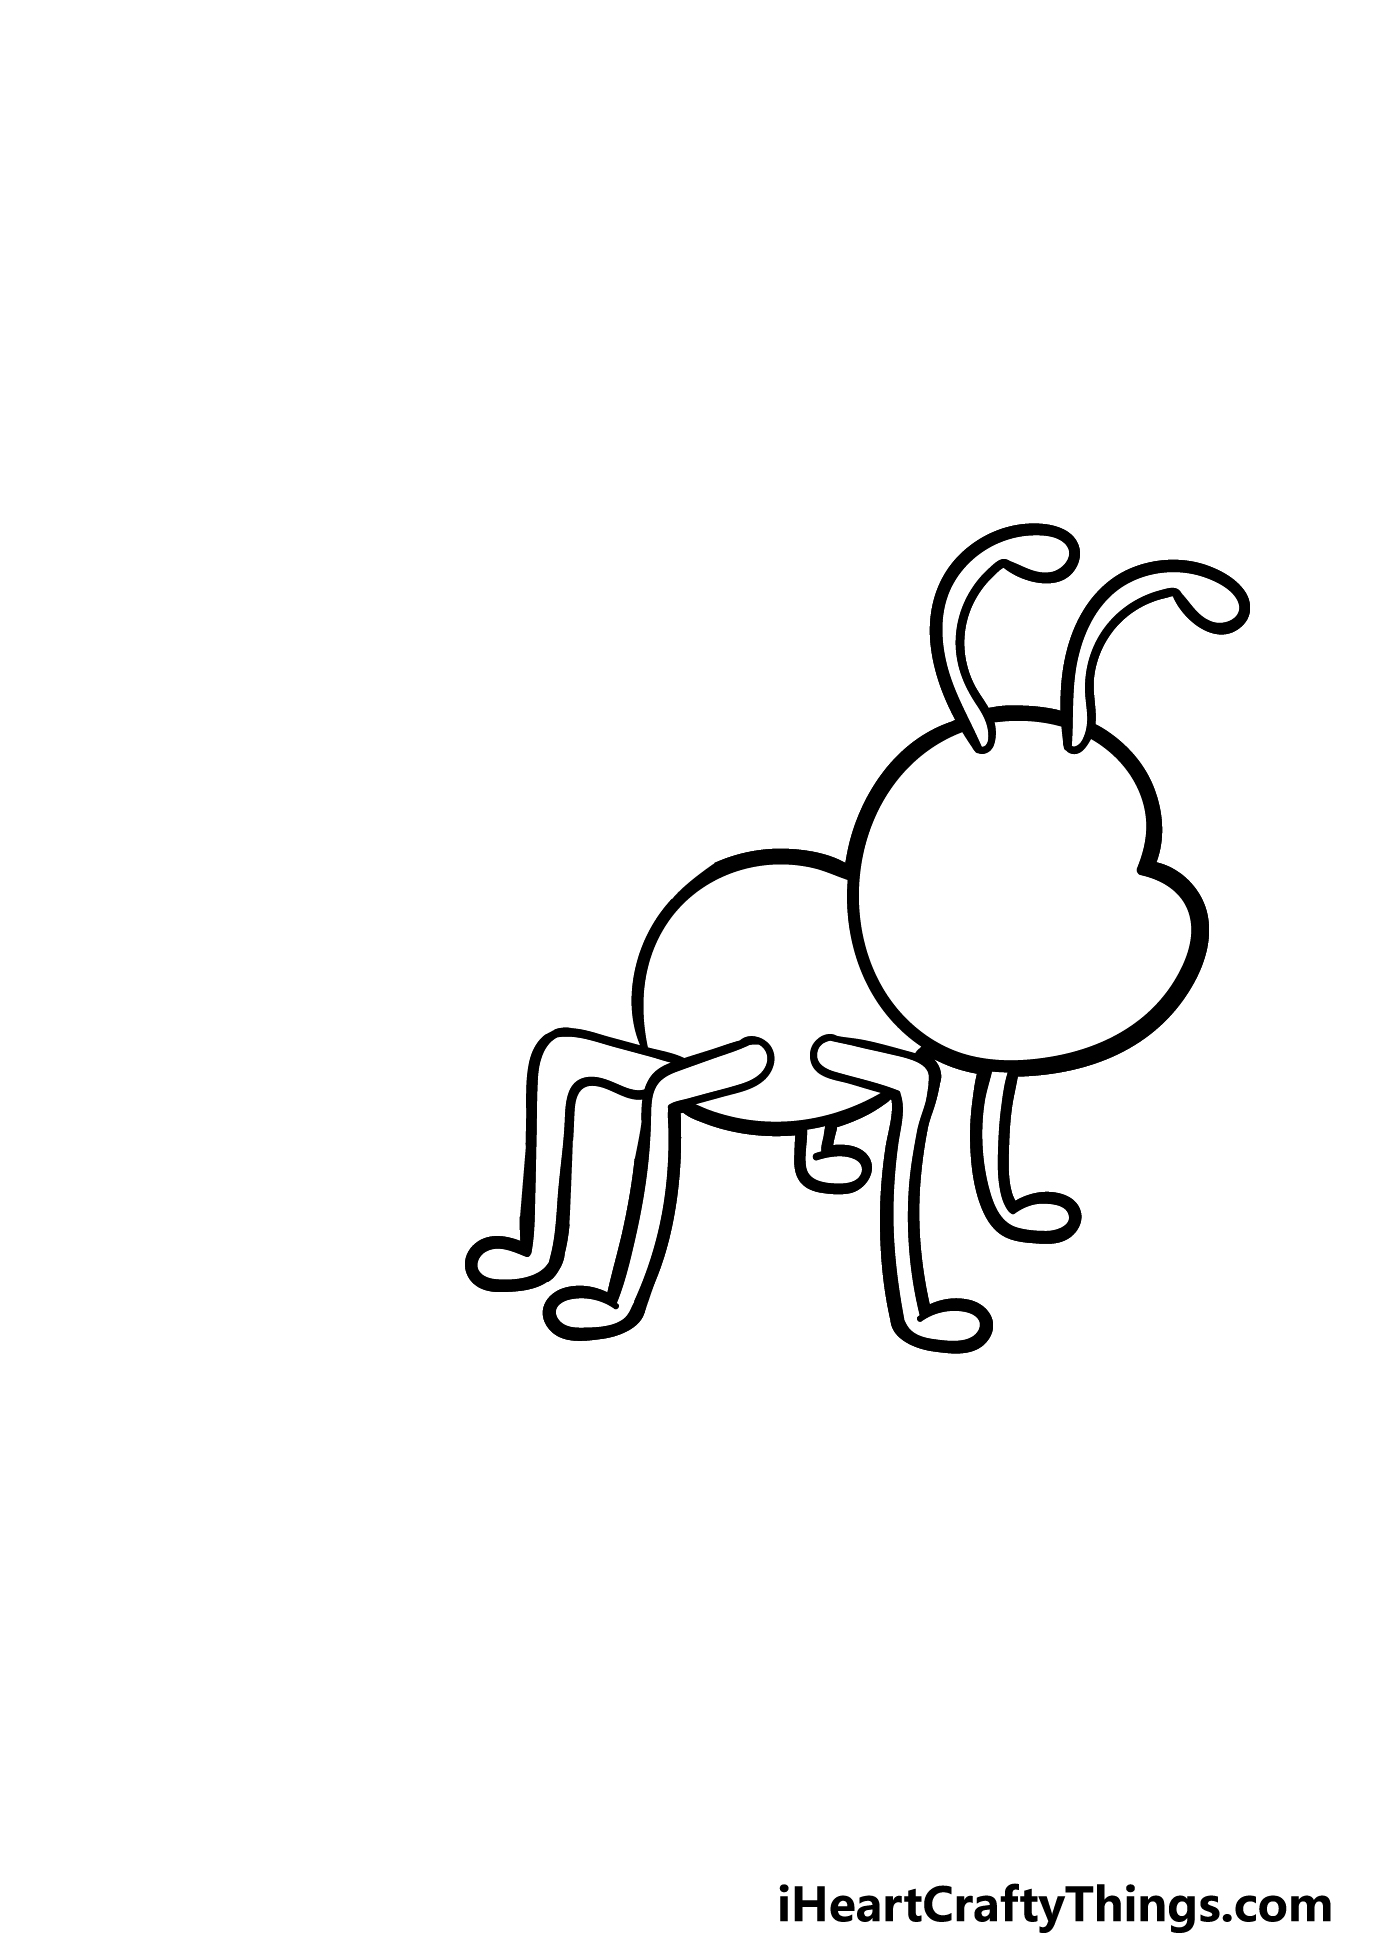 Cartoon Ant Drawing - How To Draw Cartoon Ant Step By Step!